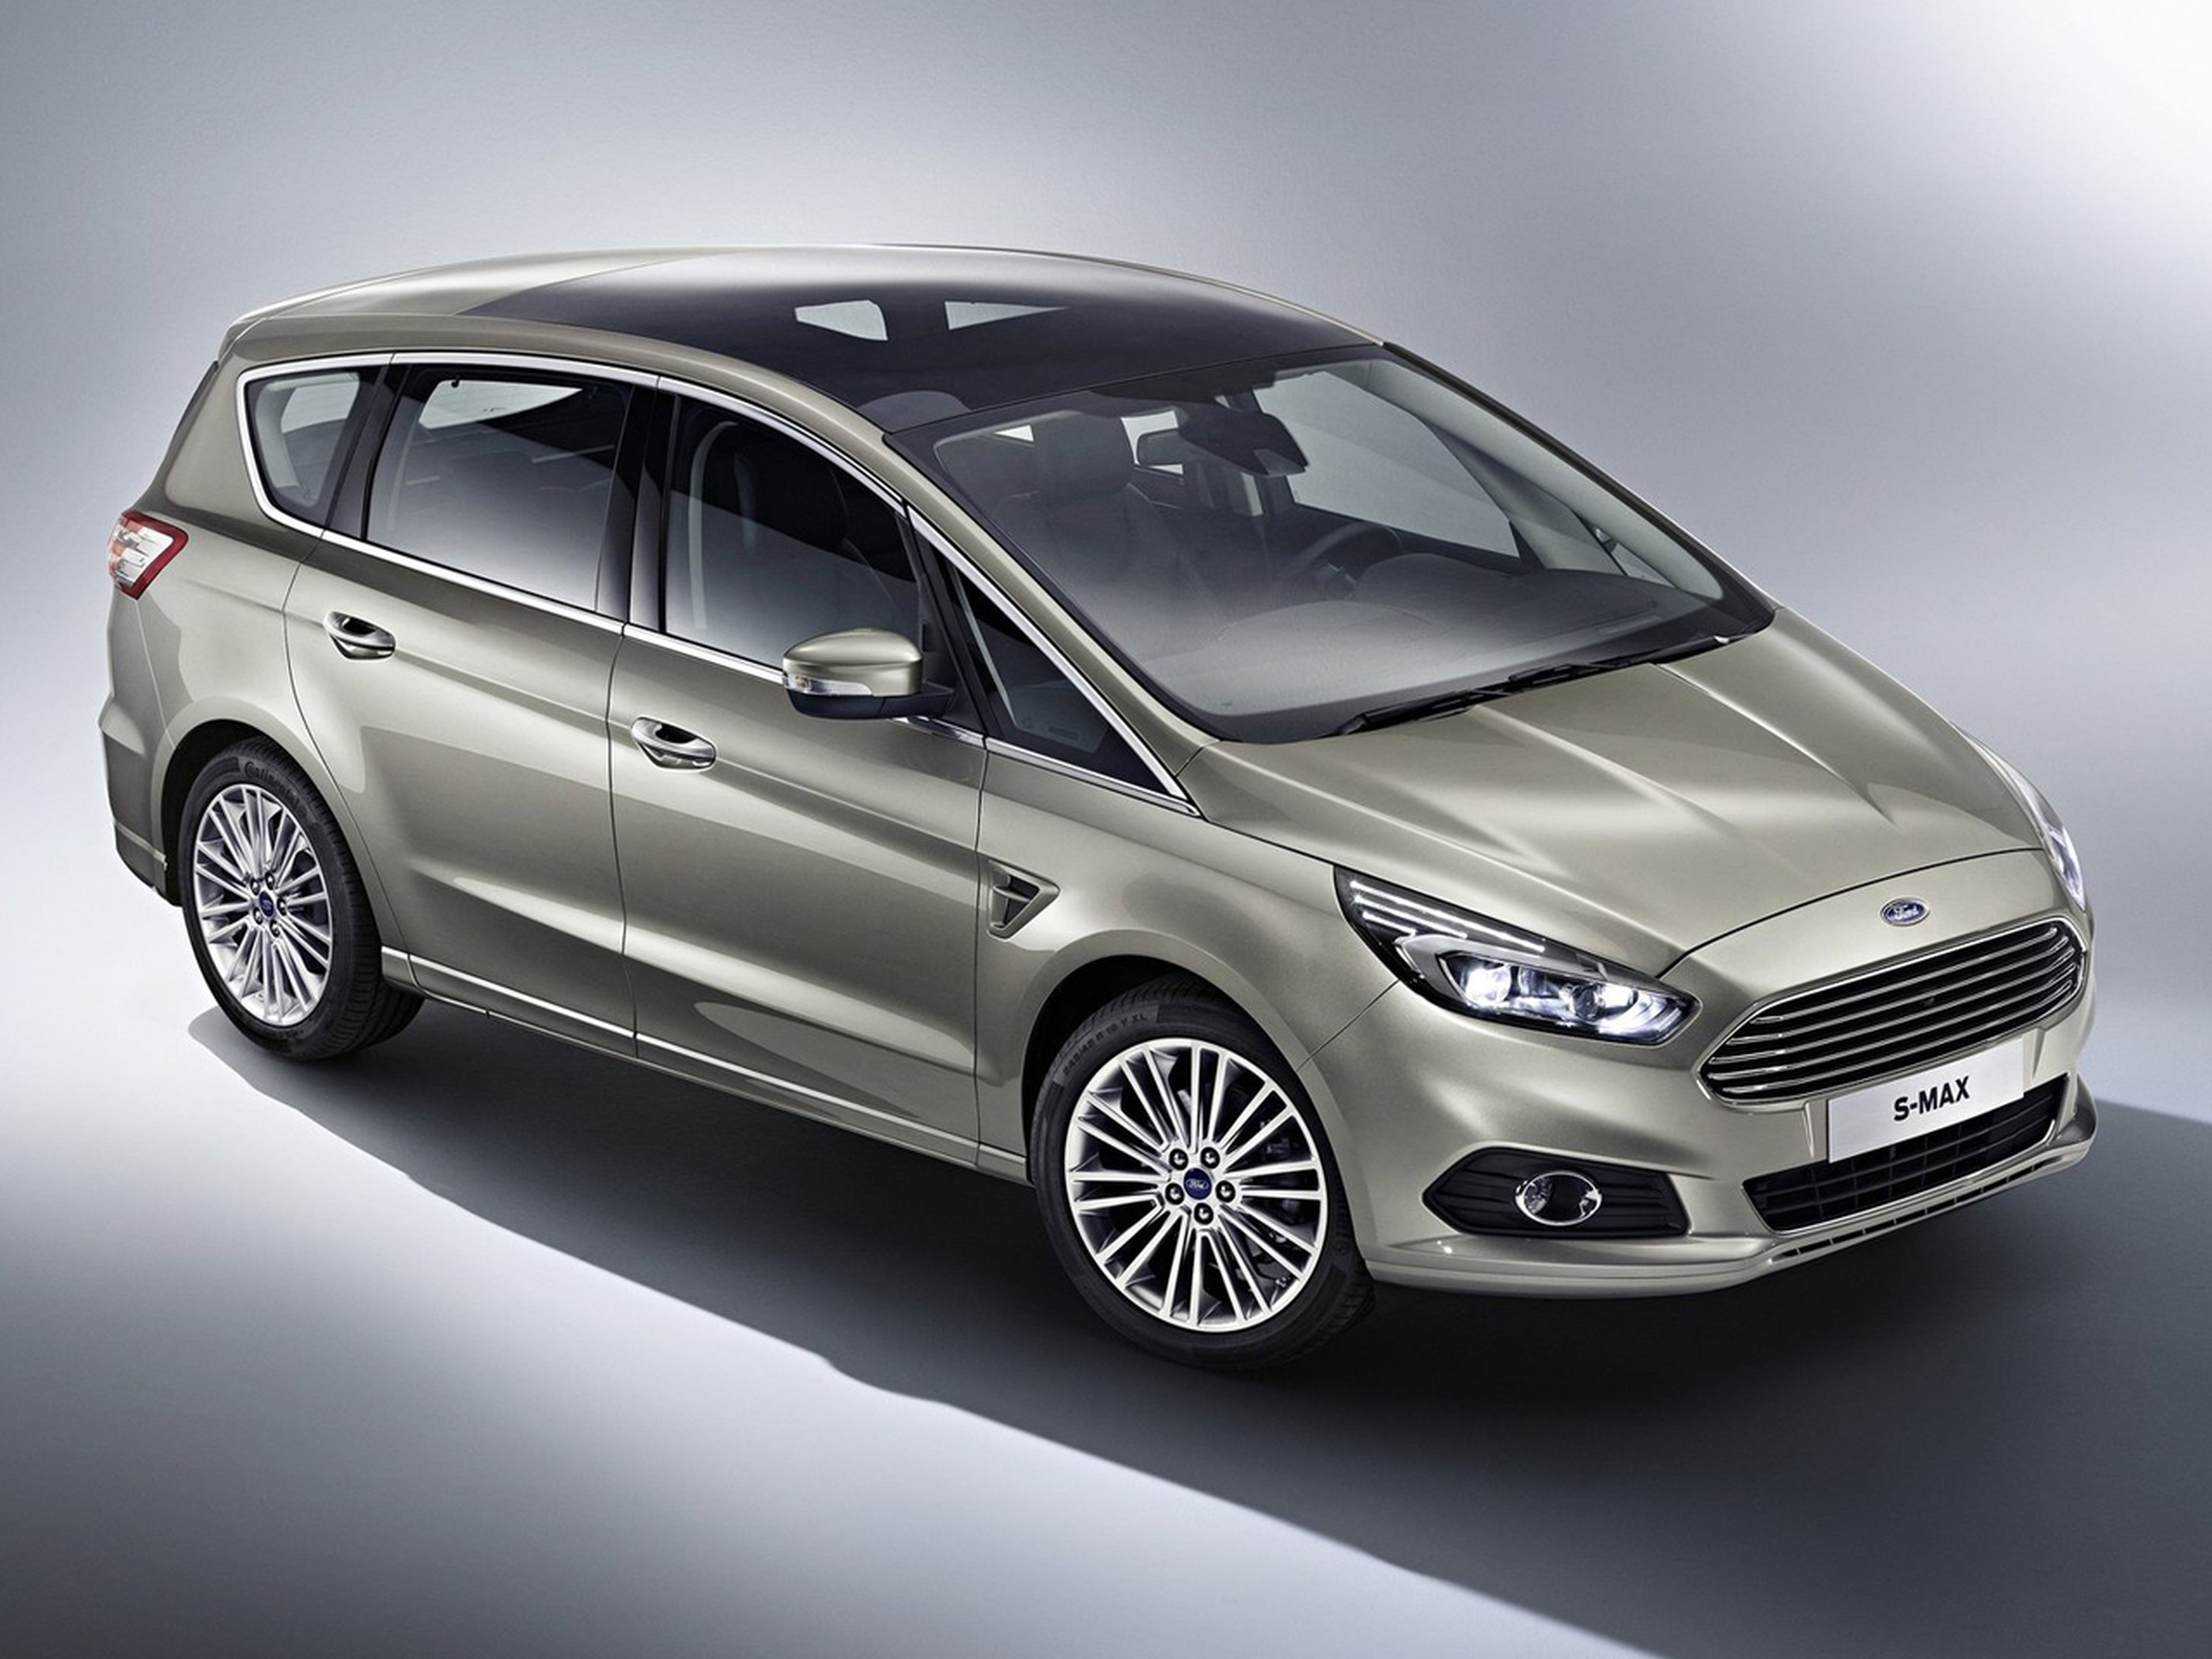 Ford-SMAX_2015_B03